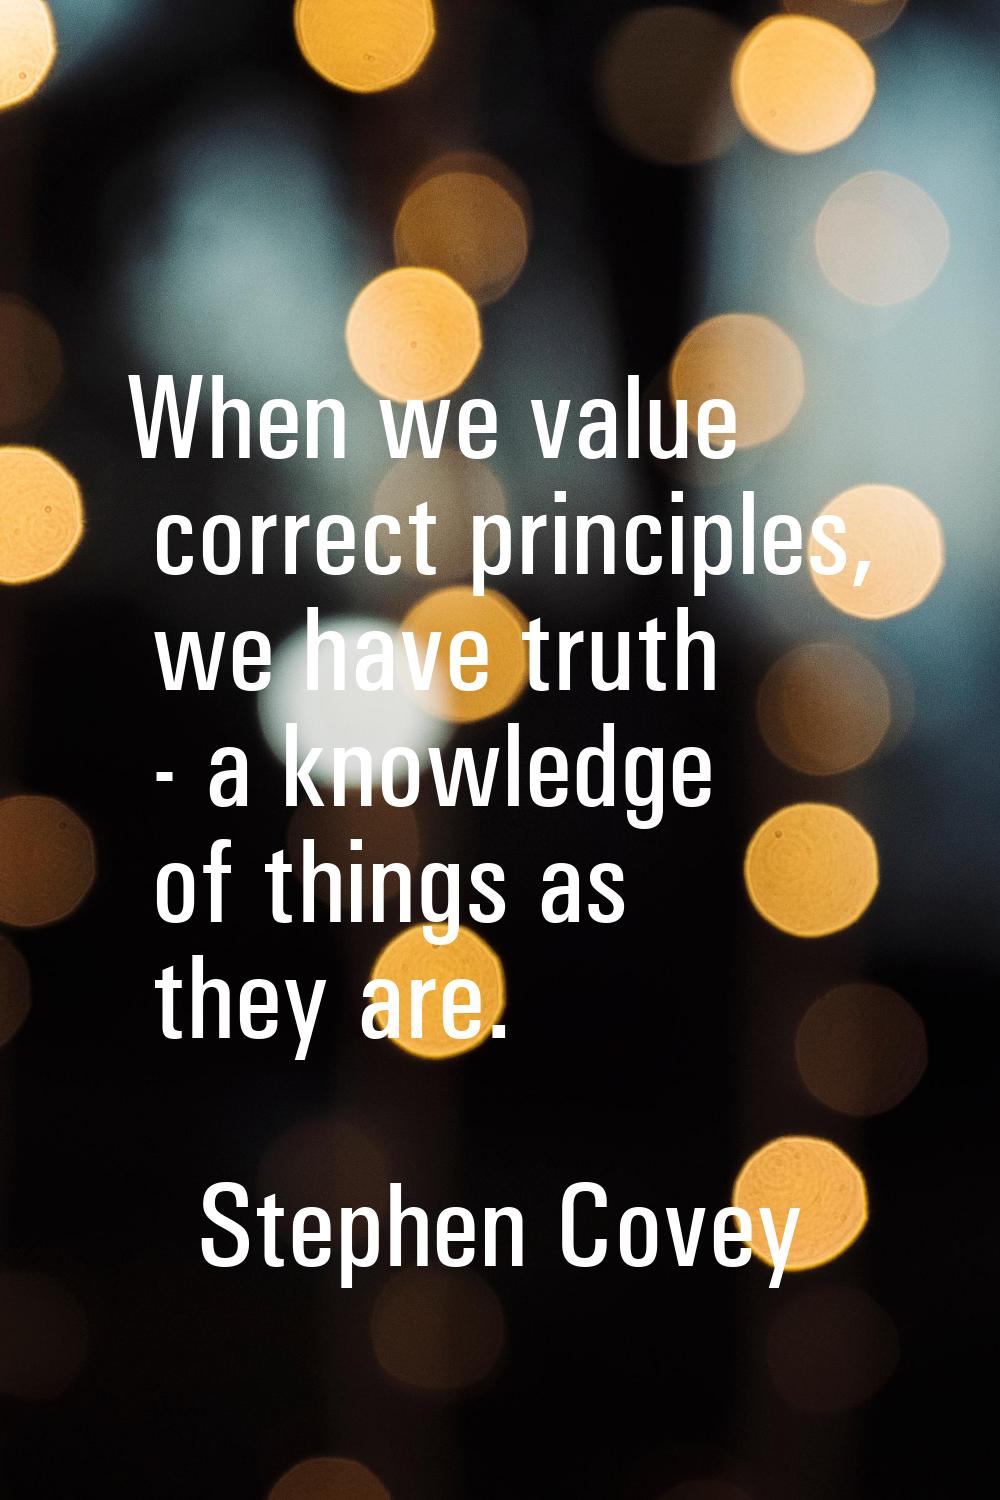 When we value correct principles, we have truth - a knowledge of things as they are.